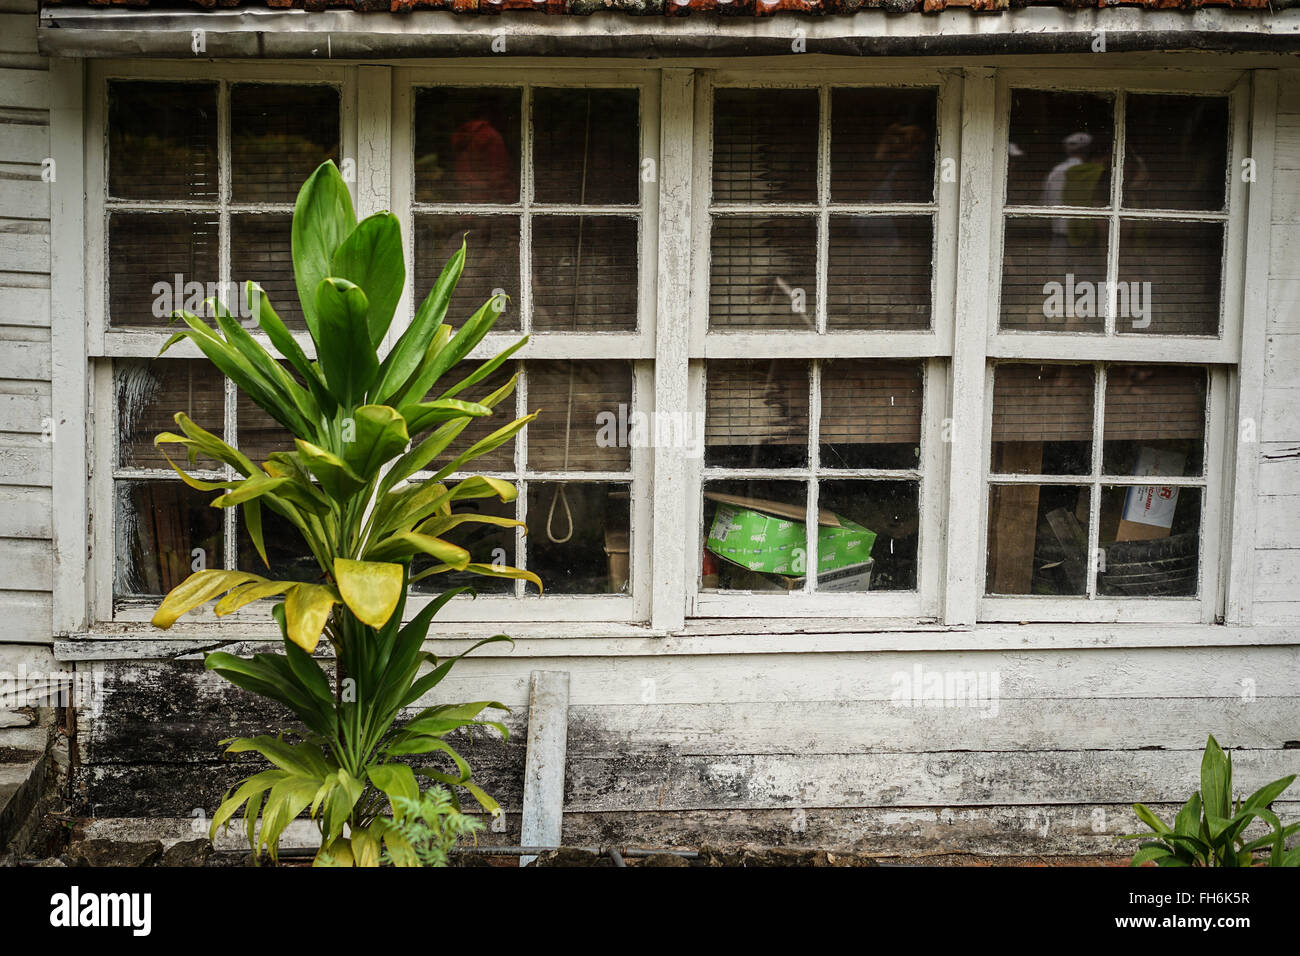 Detail of the facade of house with white worn window section and green plant growing Stock Photo